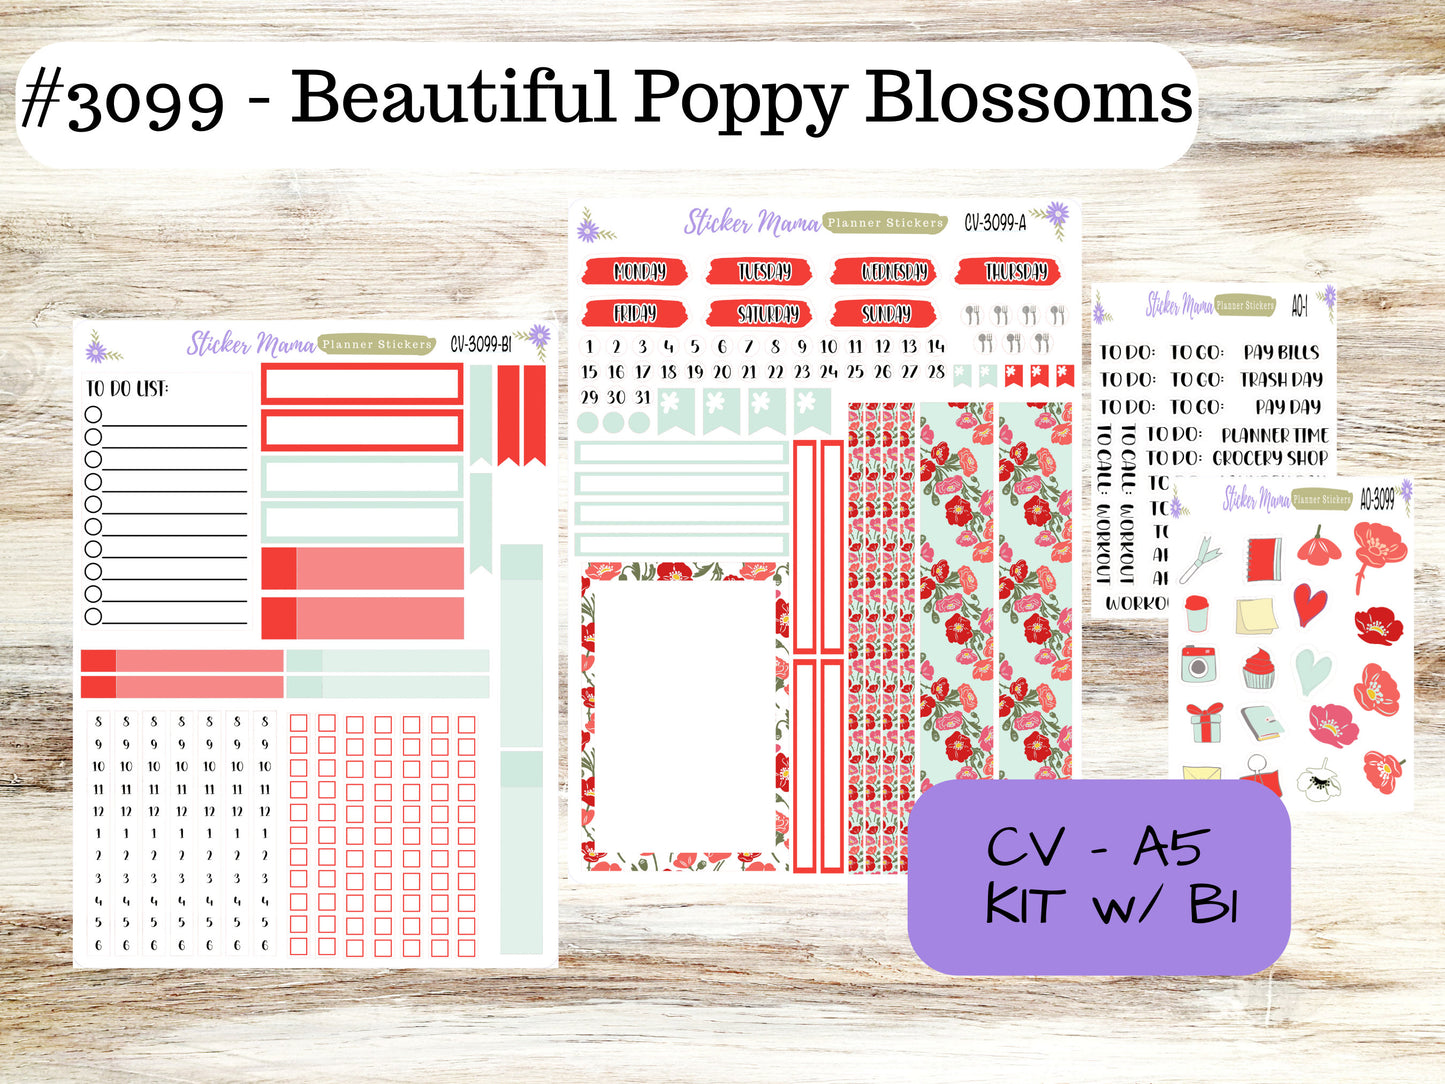 A5 COMPACT VERTICAL-Kit #3099 || Beautiful Poppy Blossoms  - Compact Vertical - Planner Stickers - Erin Condren Compact Vertical Weekly Kit